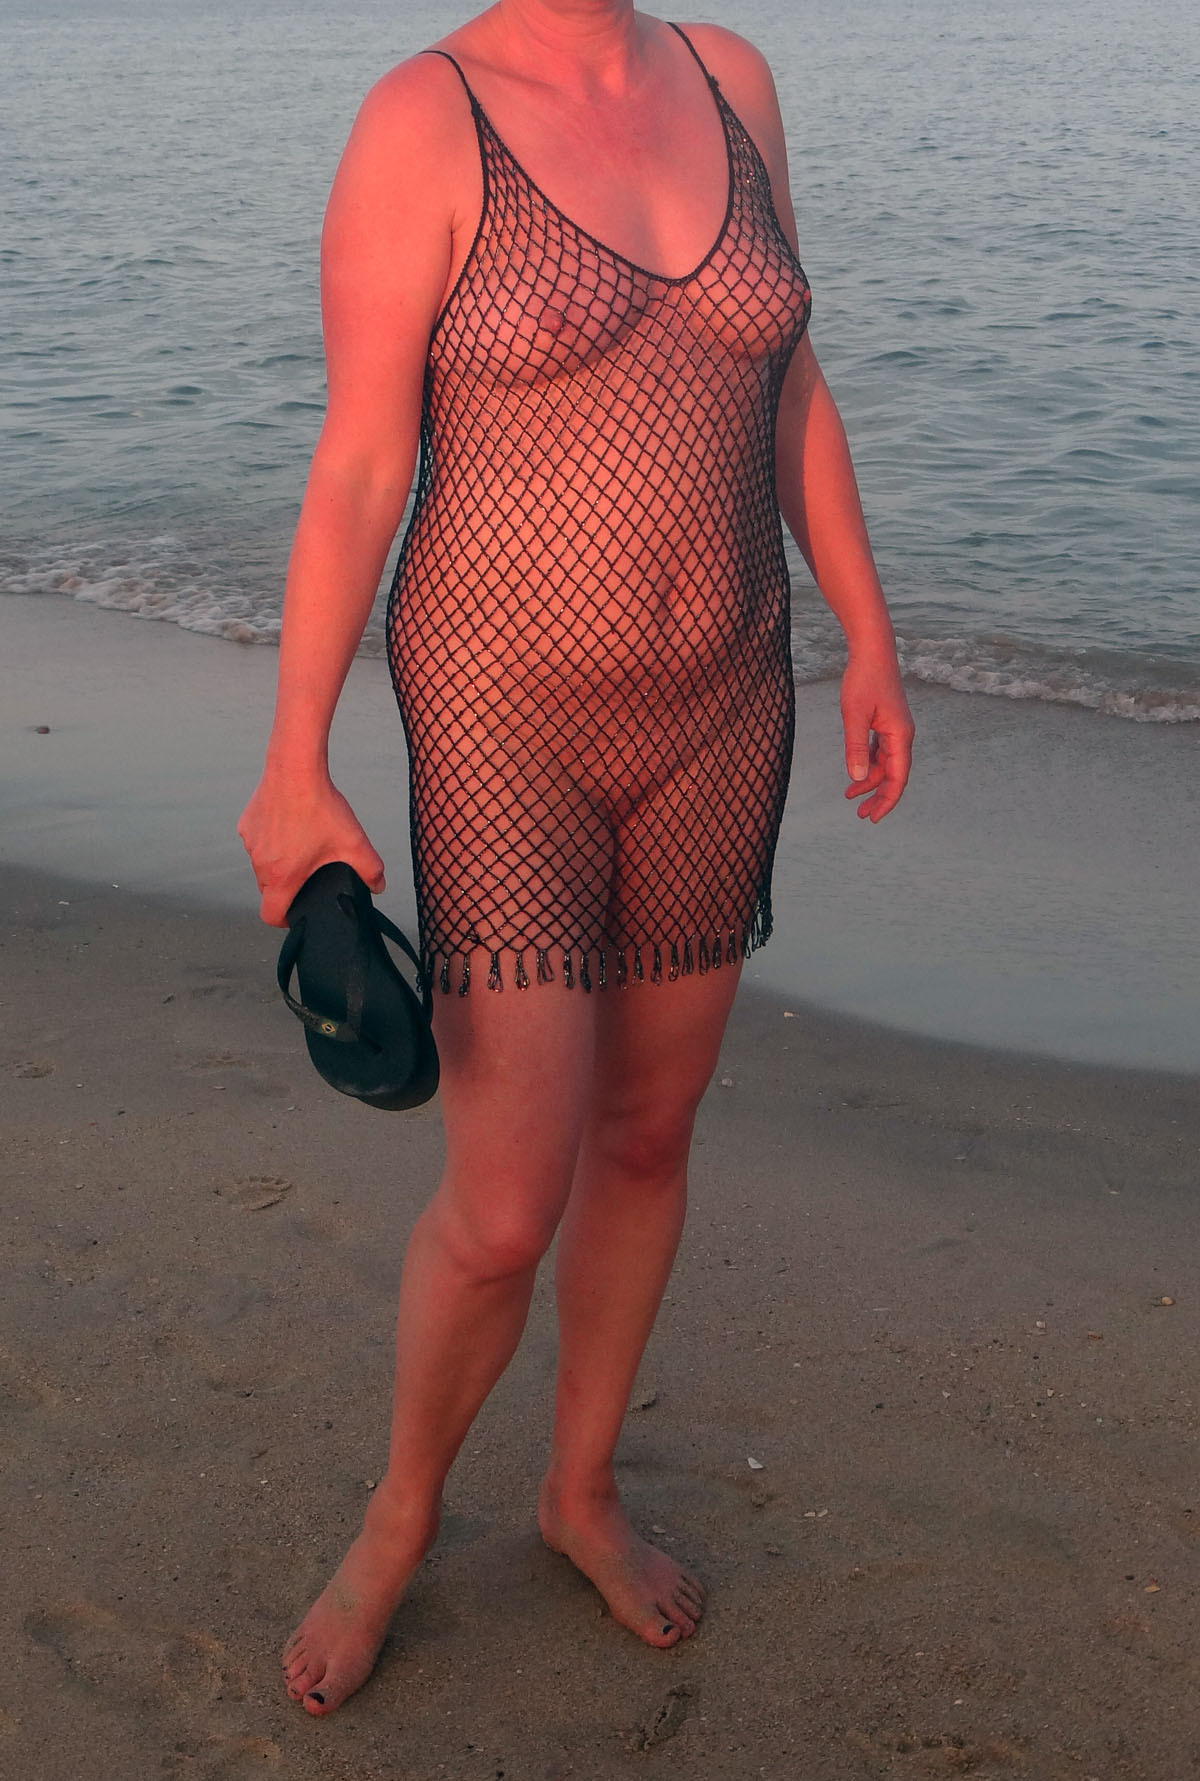 livefree-n-nude:  corpas1:  Cap d'Agde nudists in typical outfits   When total nudity